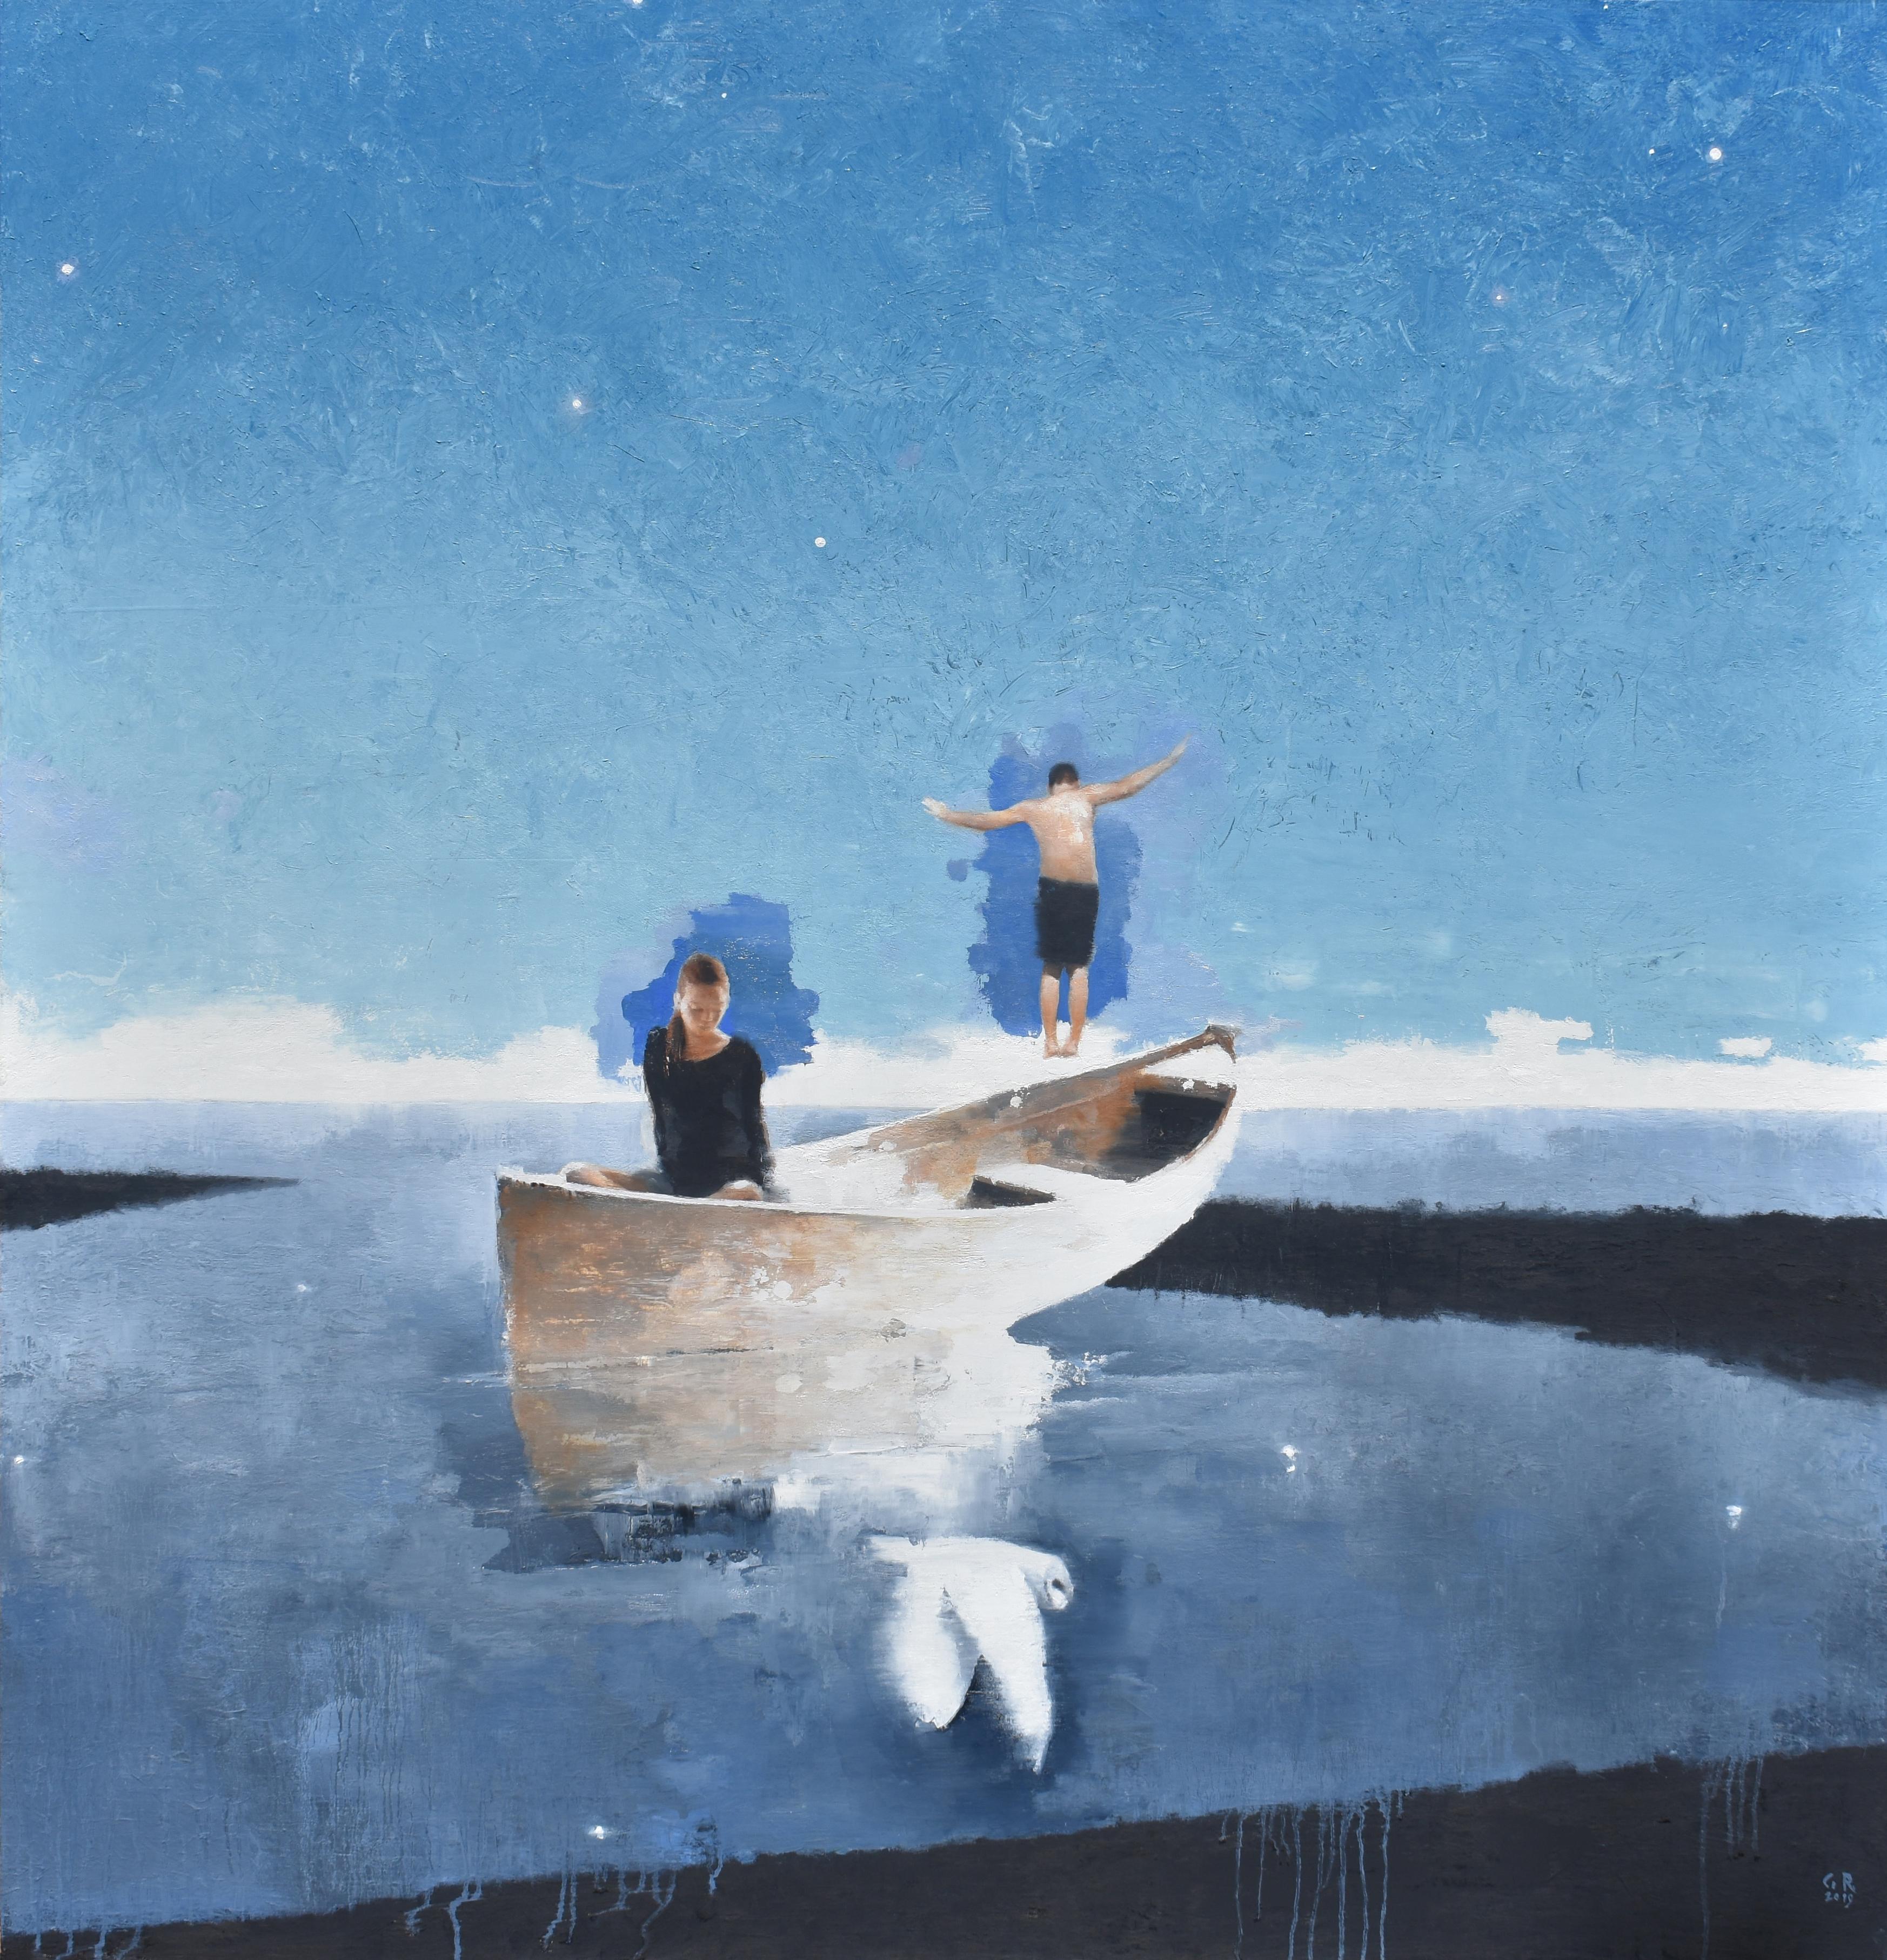 Gary Ruddell Figurative Painting - Who We Are, Contemporary Realism, Figurative, Water, Boat, Sky, Blue